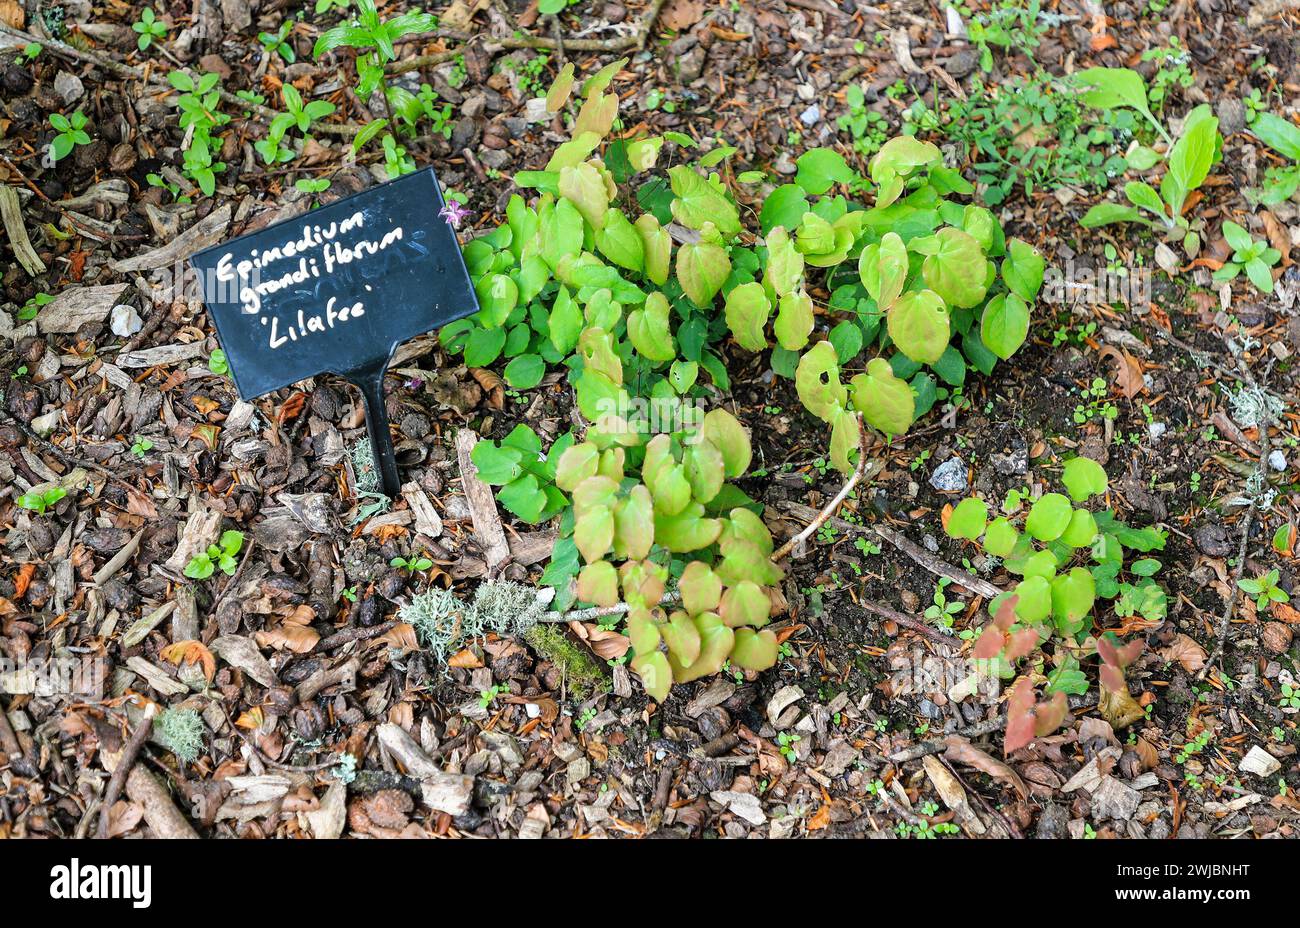 The large flowered barrenwort, or bishop's hat, grandiflroum 'Lilafee' ground cover plant Stock Photo